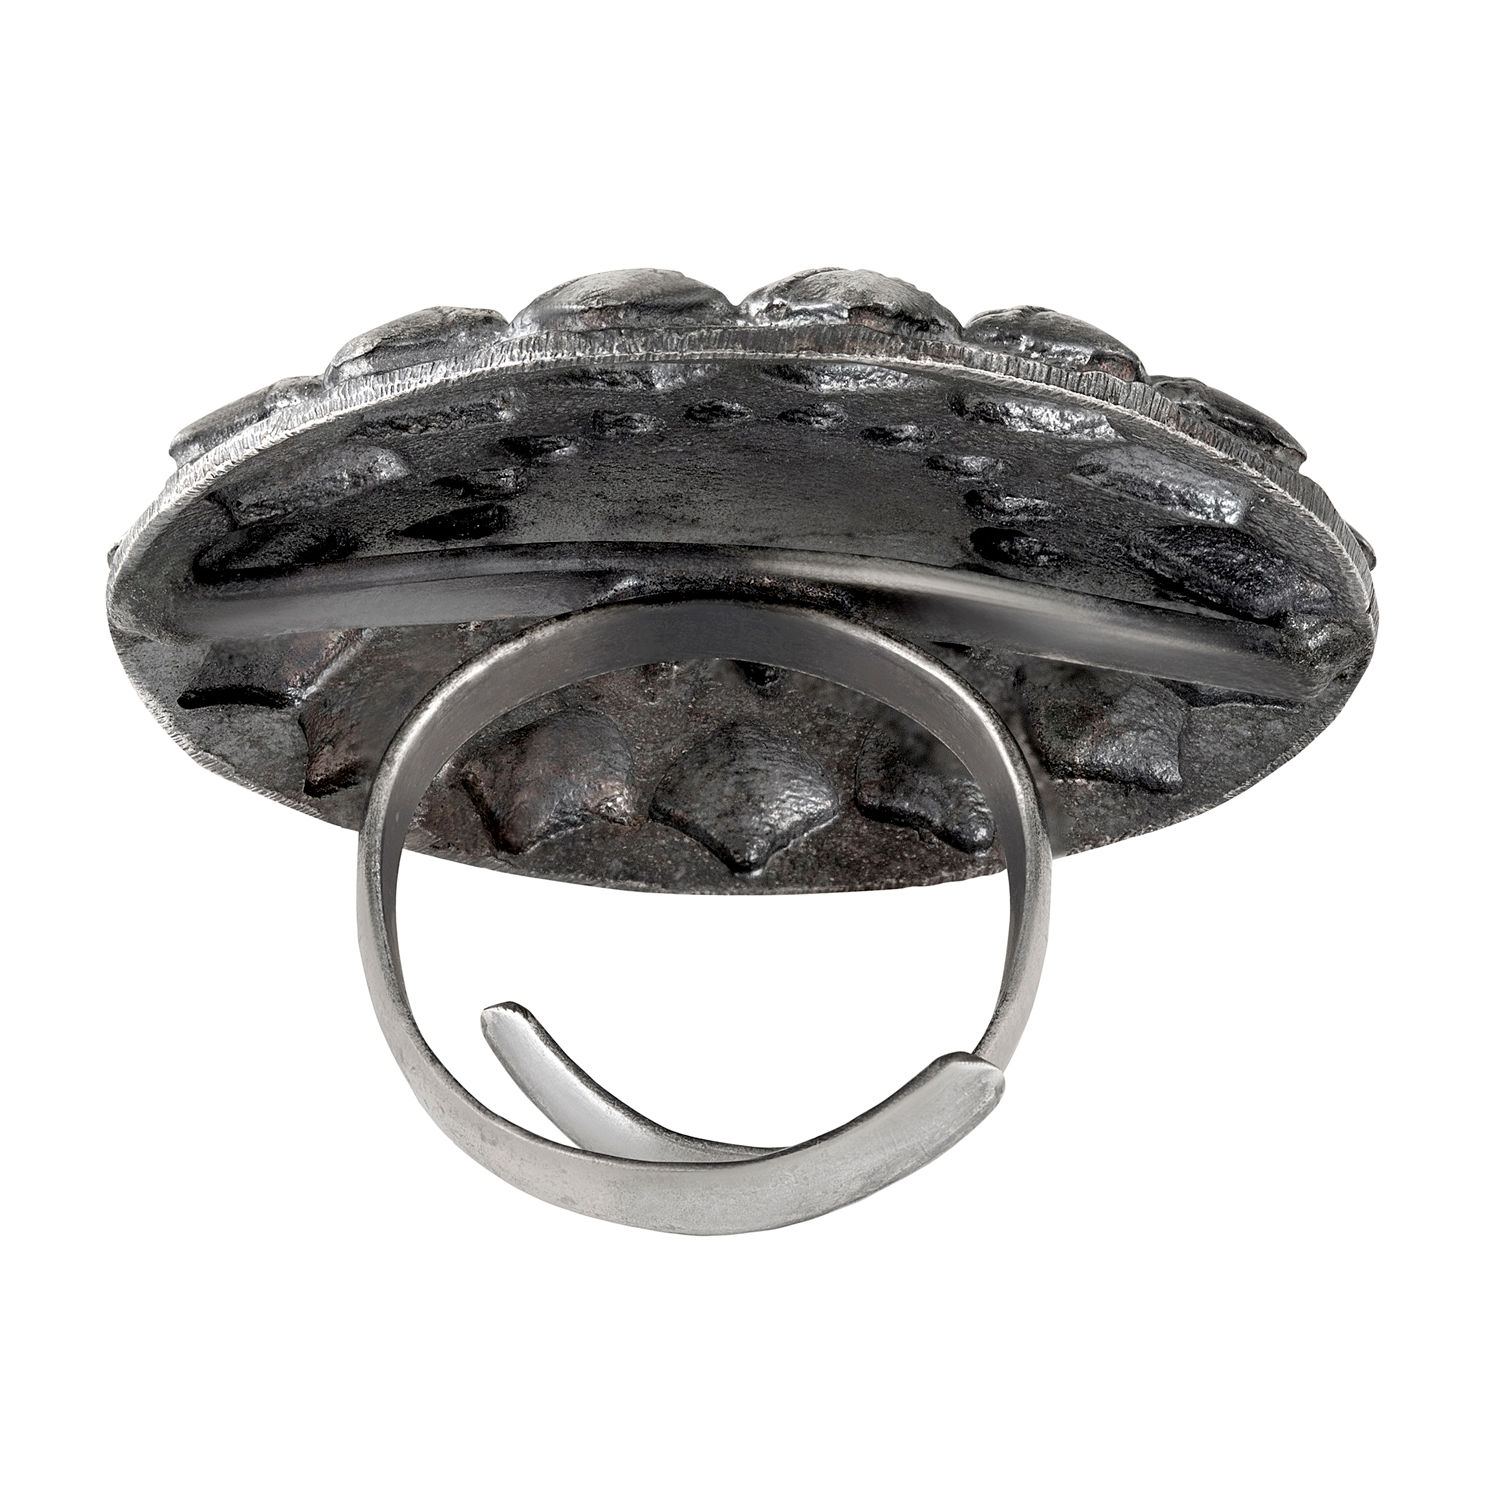 Multicolor Stones Oxidized Metal Casual Use Finger Rings for Girls -  Stylish & Fancy Adjustable Size Oxidised Big Size Cocktail Rings for Women  and Girls. | K M HandiCrafts India